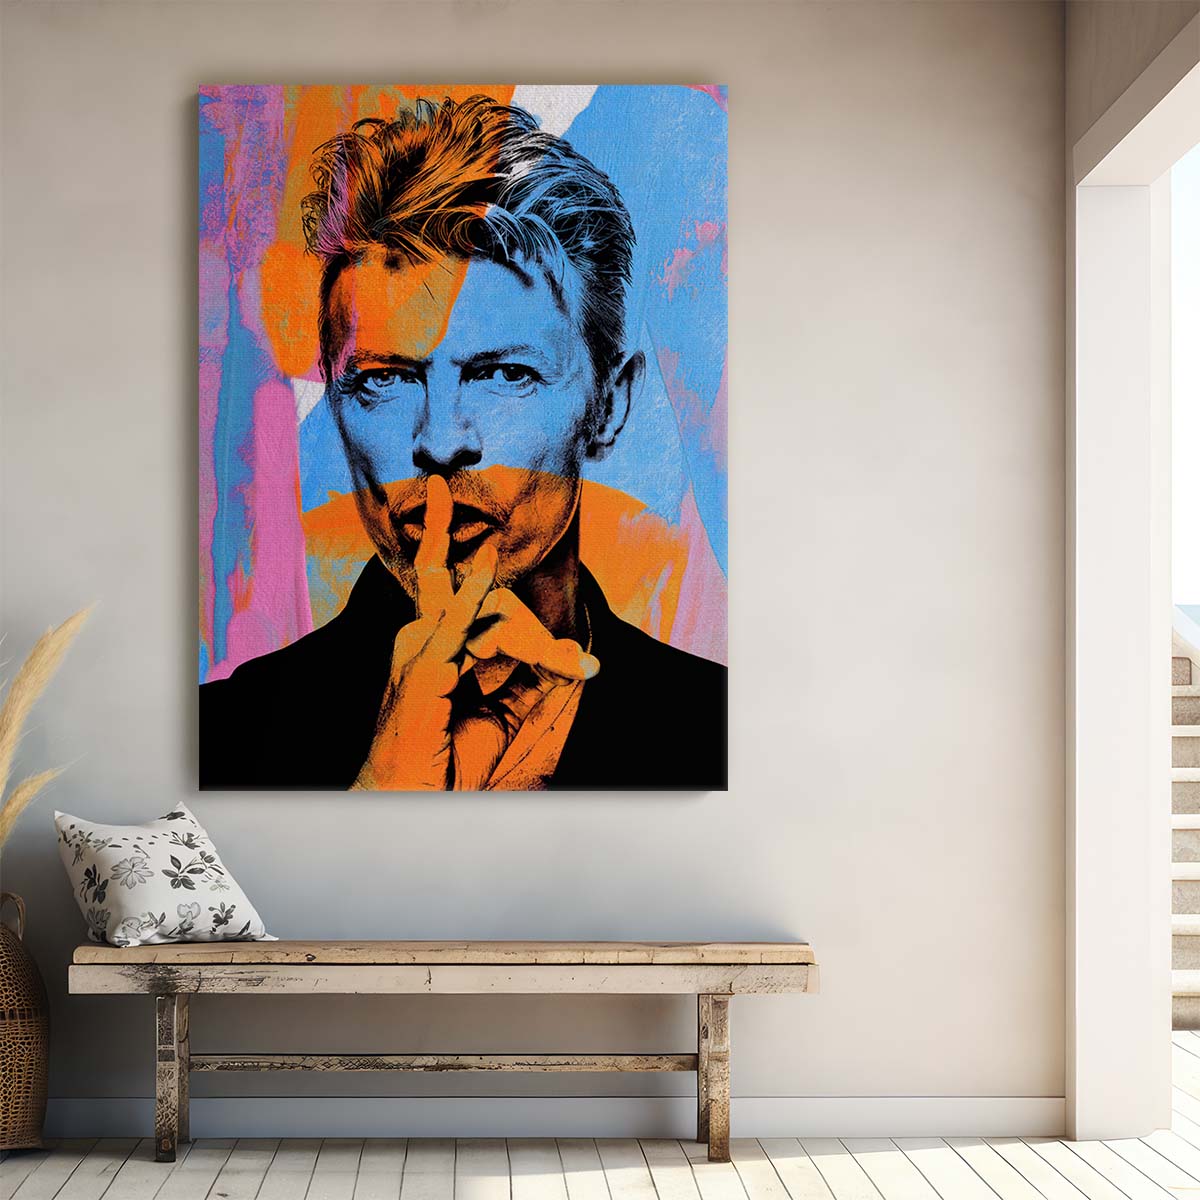 David Bowie Bright Colors Wall Art by Luxuriance Designs. Made in USA.